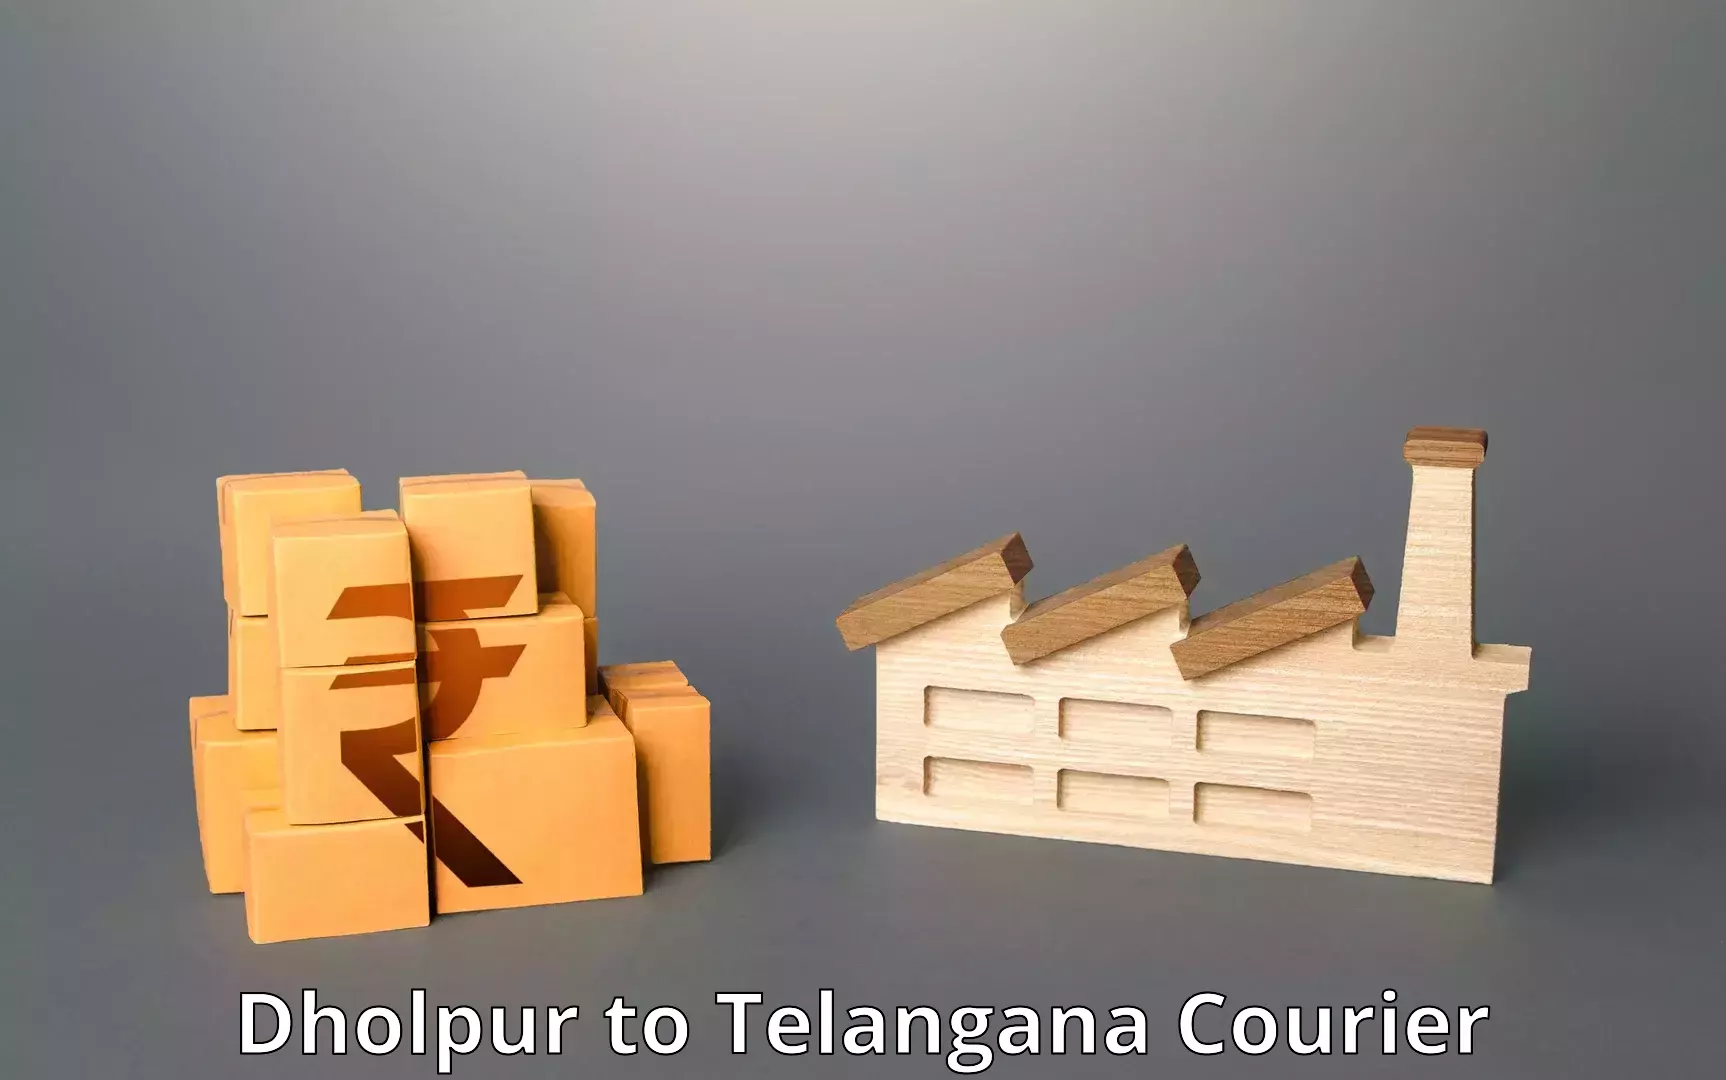 State-of-the-art courier technology Dholpur to Telangana